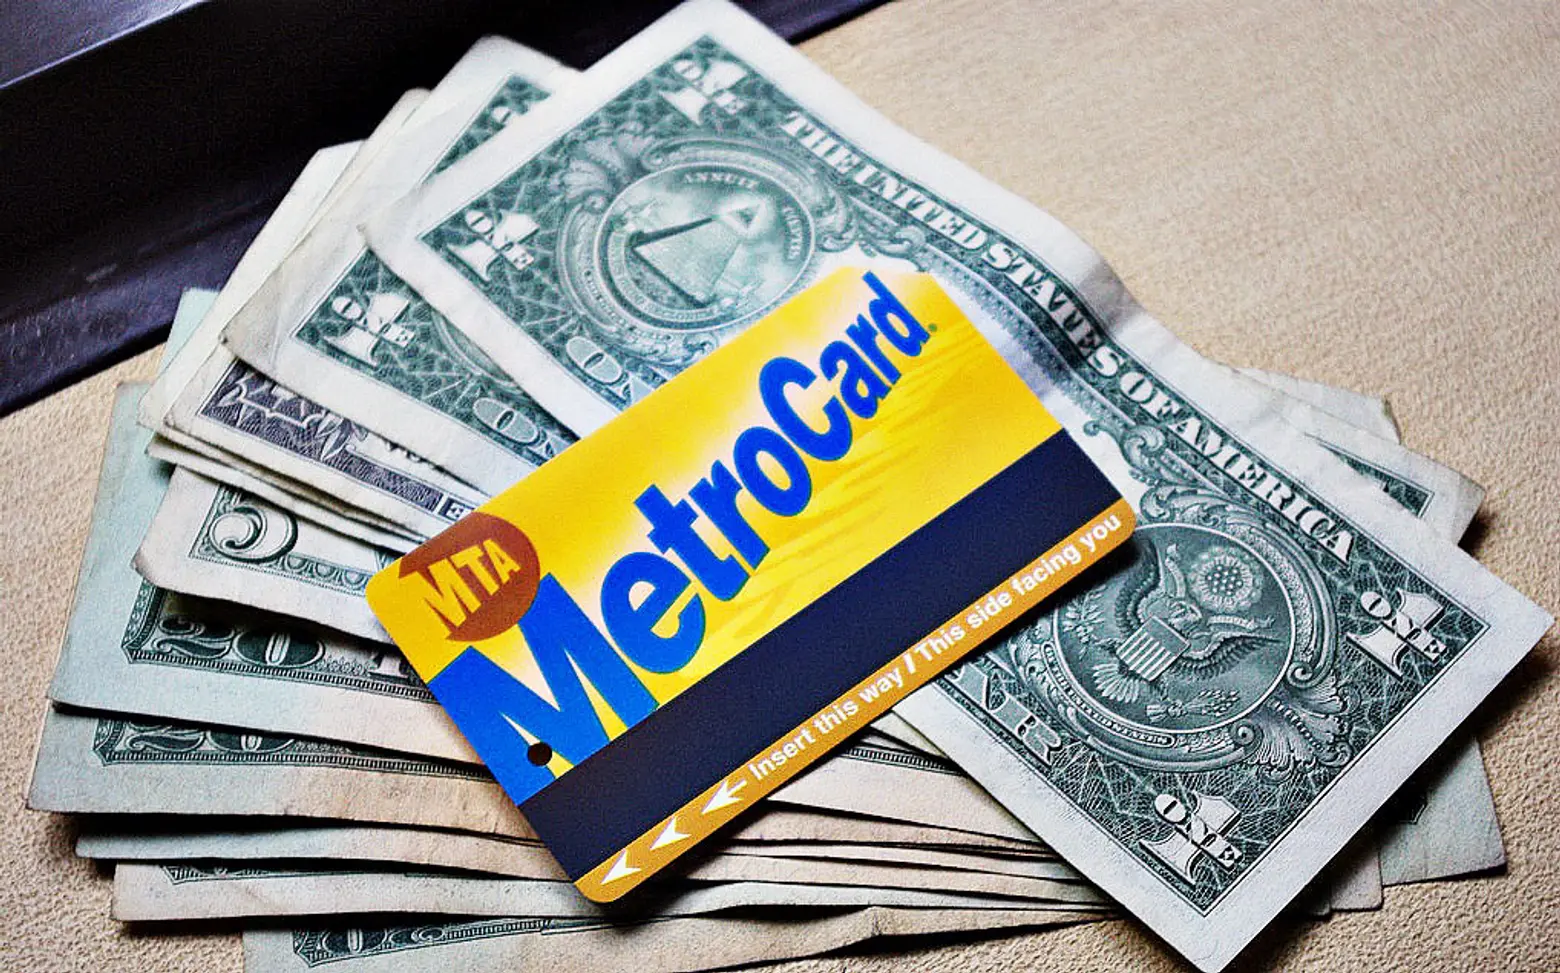 NYC Households Spend $130 a Month Funding the MTA